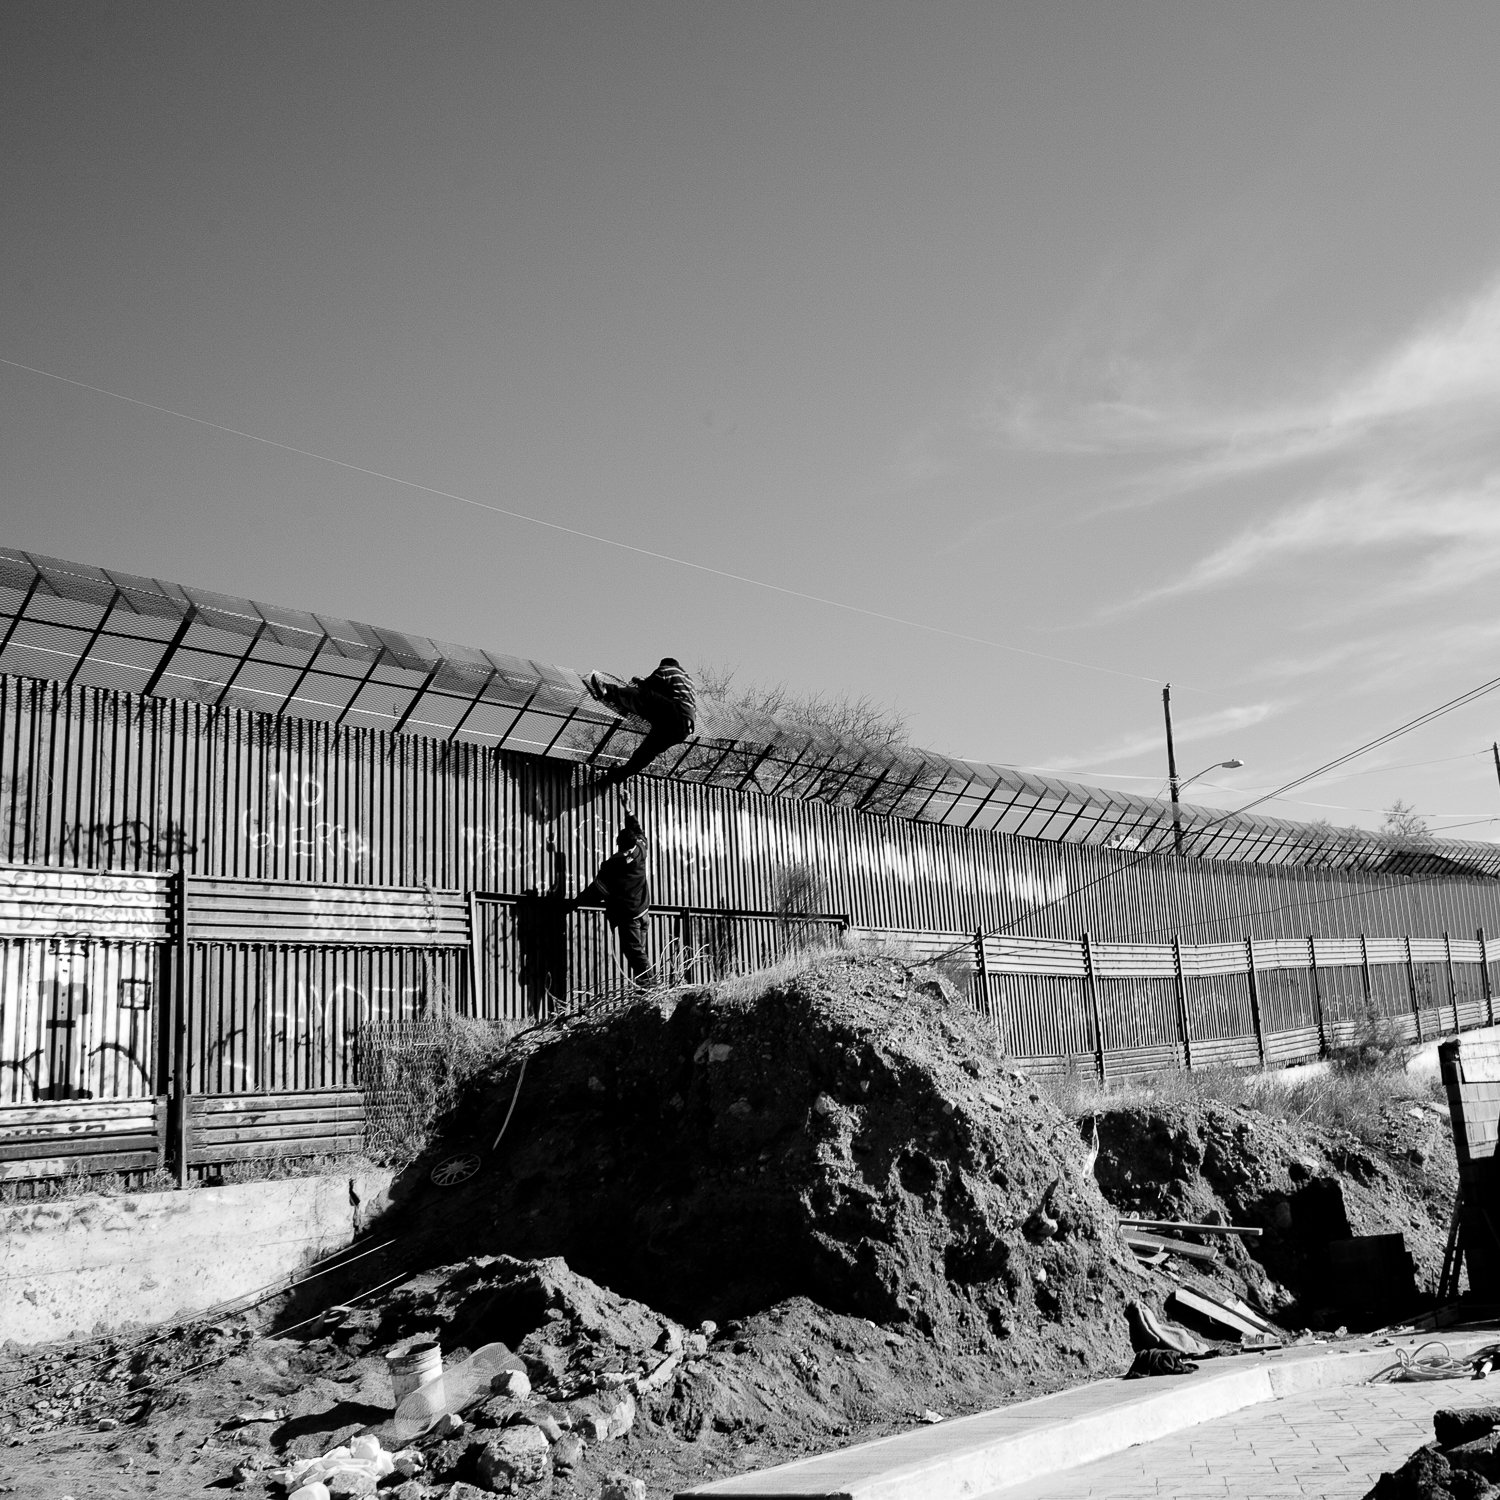  Two men climb over the fence separating the United States and Mexico in an attempt to cross into the United States illegally from Nogales, Sonora, Mexico. 